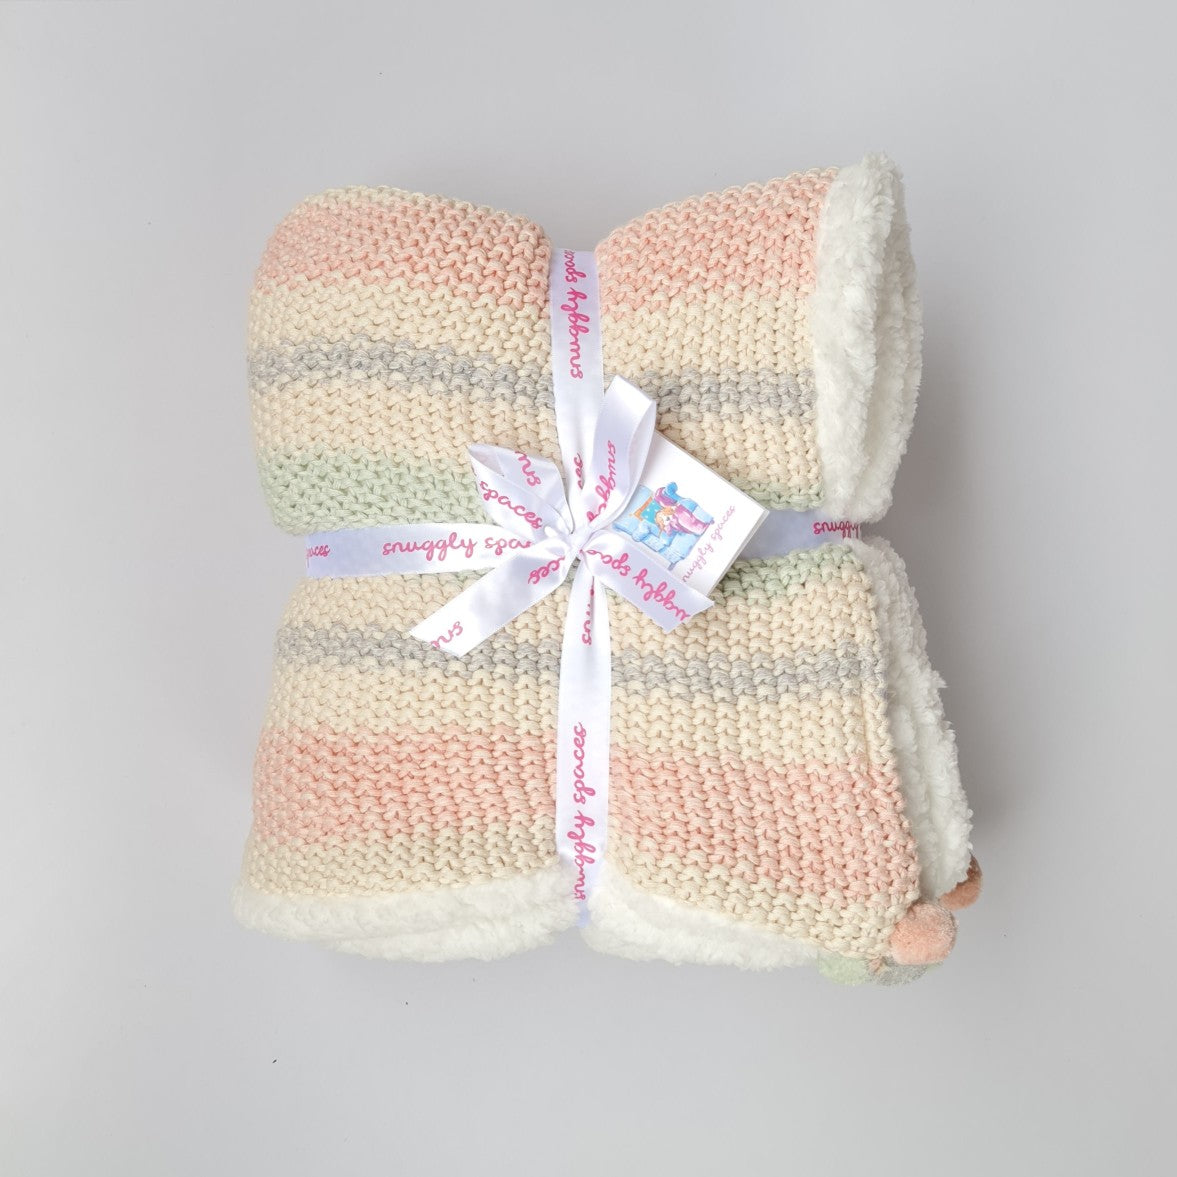 Snuggly Winter Knitted Blanket with Sherpa - Pastel Stripes